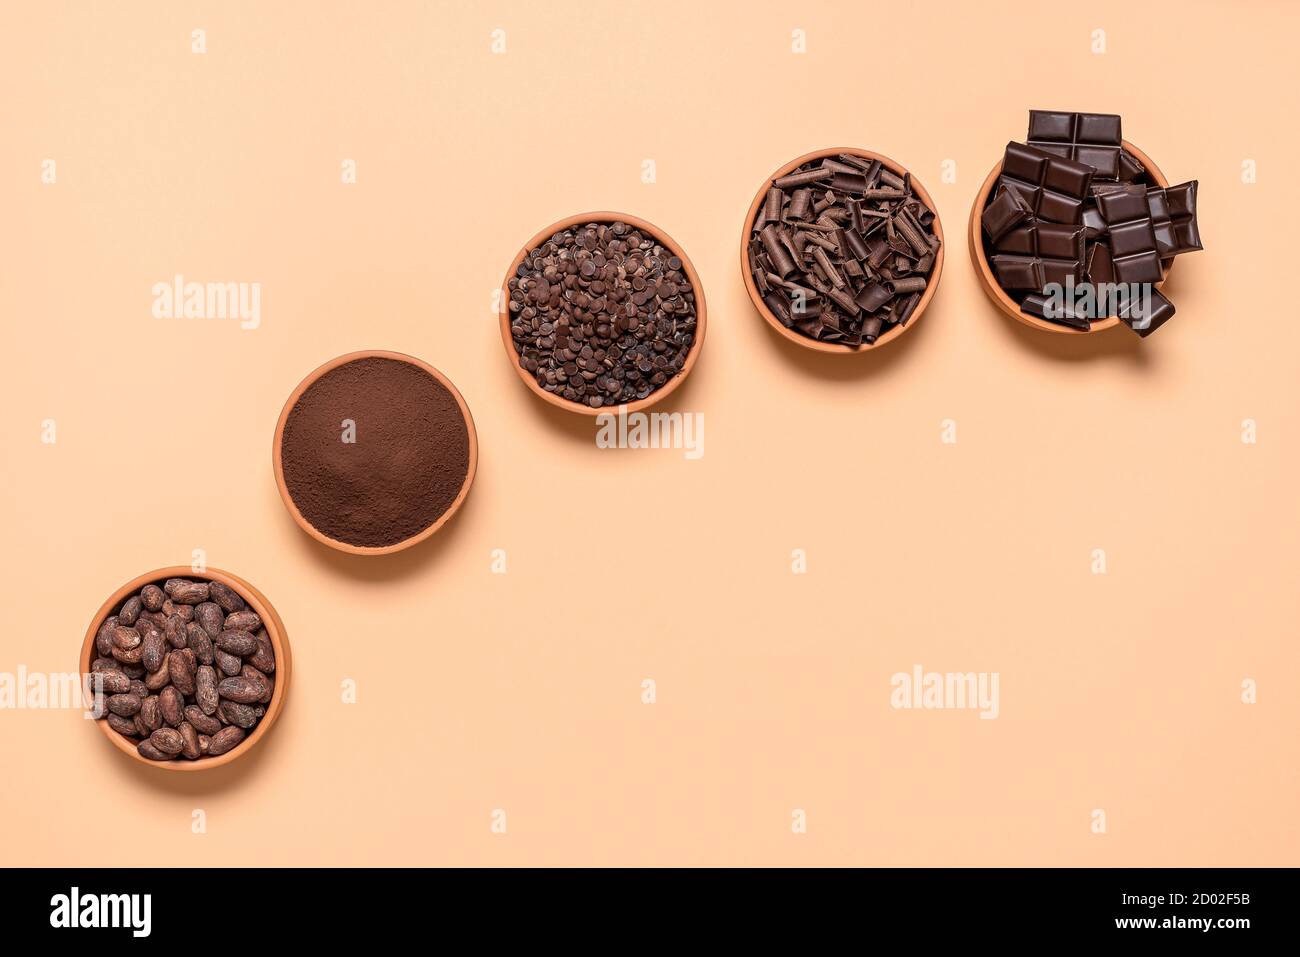 Organic cacao beans and chocolate chunks in ceramic bowls, isolated on a beige background. Flat lay with chocolate ingredients and cocoa powder. Stock Photo